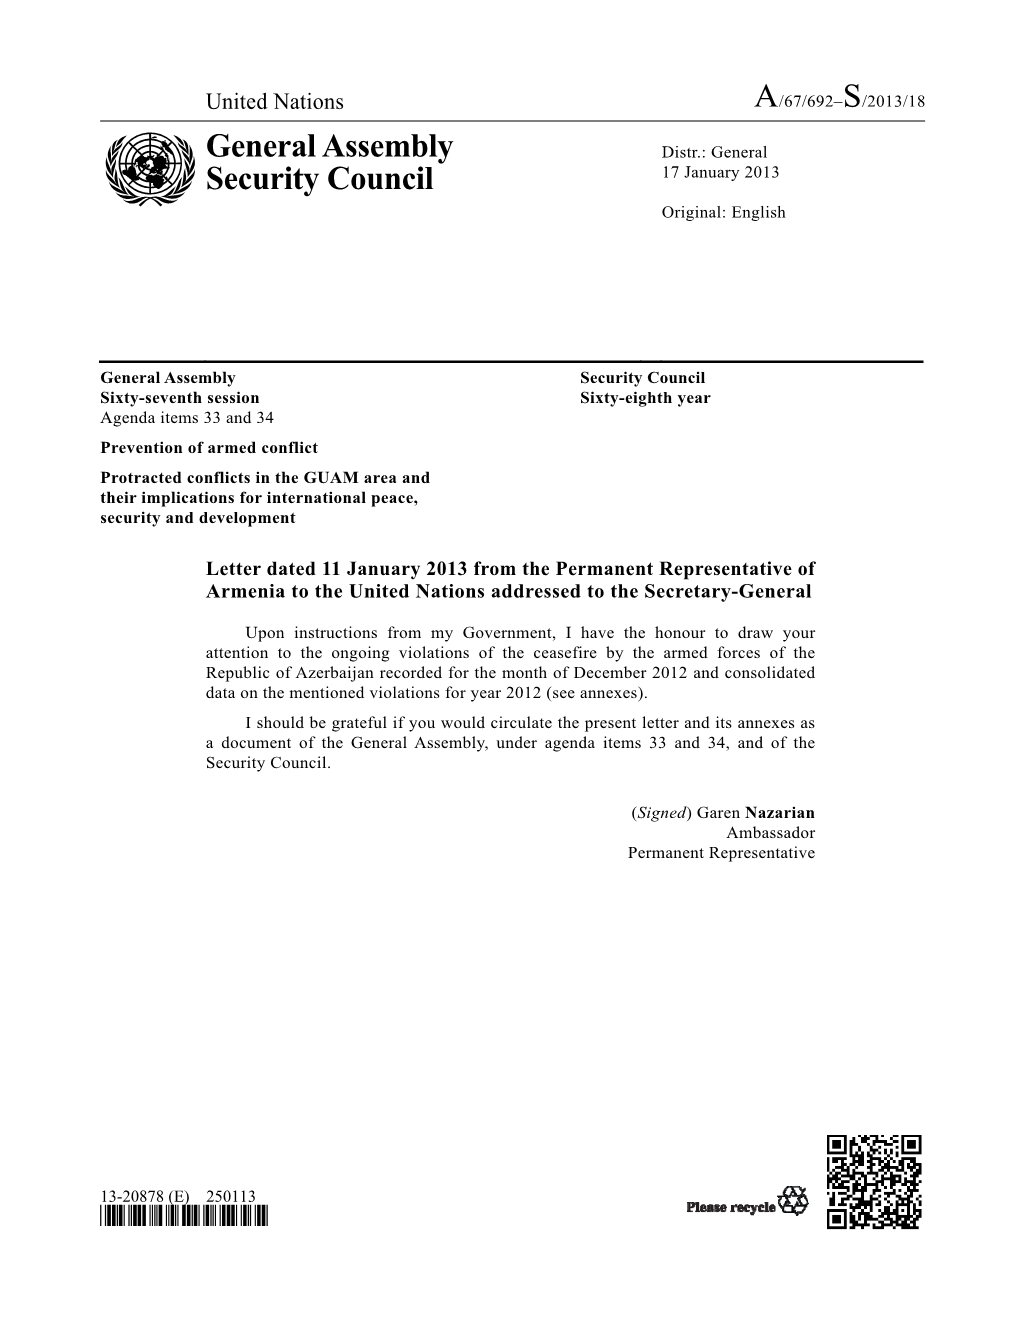 General Assembly Security Council Sixty-Seventh Session Sixty-Eighth Year Agenda Items 33 and 34